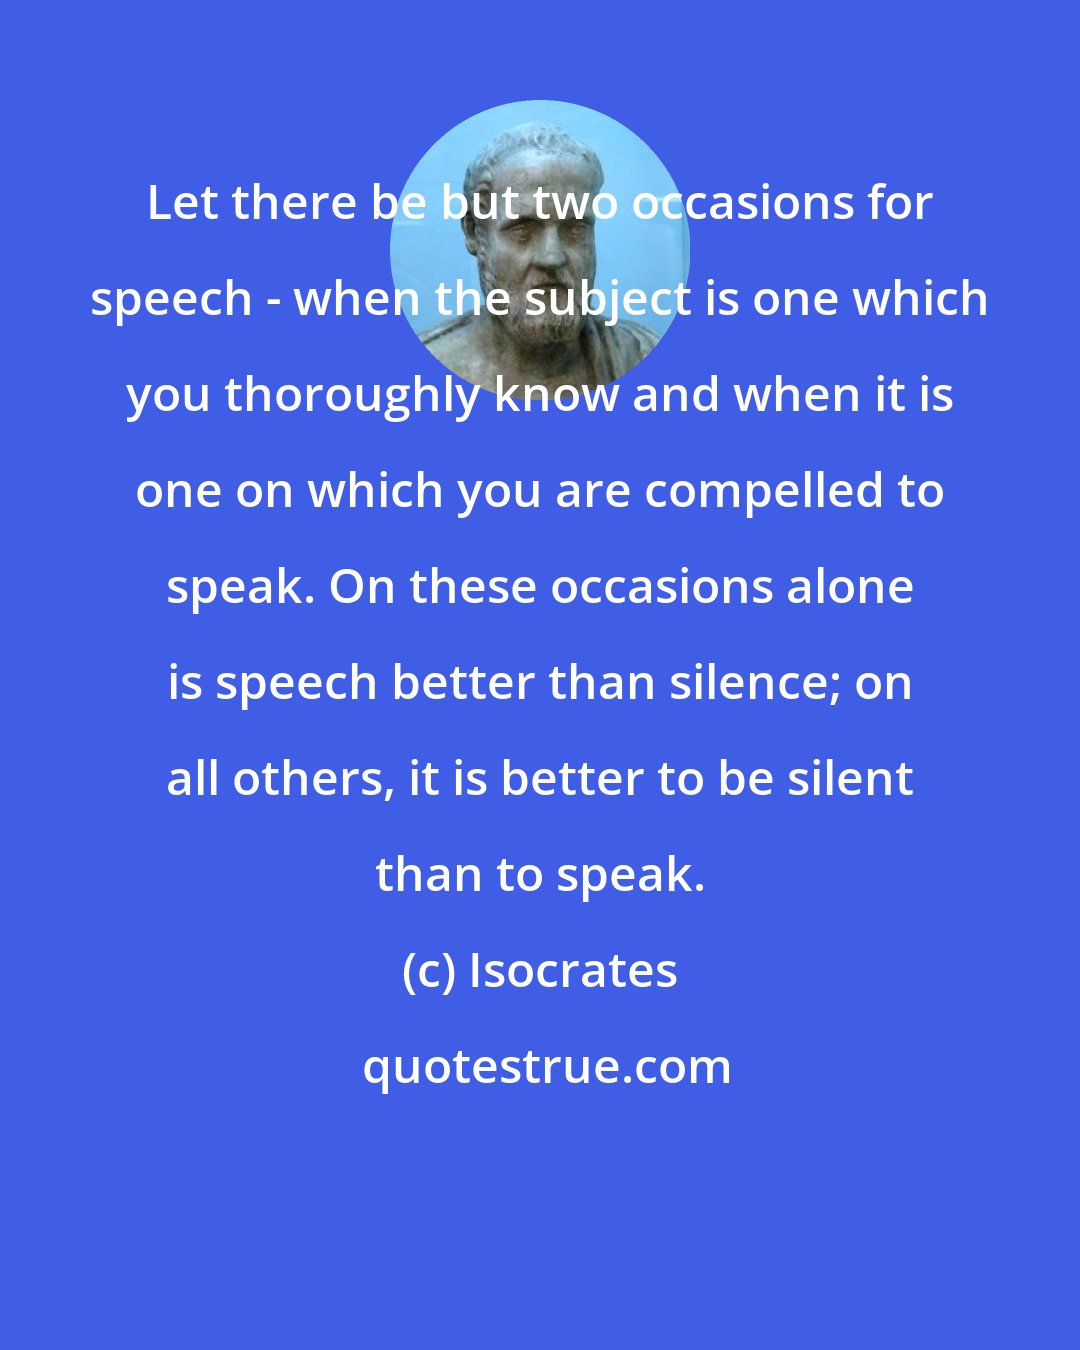 Isocrates: Let there be but two occasions for speech - when the subject is one which you thoroughly know and when it is one on which you are compelled to speak. On these occasions alone is speech better than silence; on all others, it is better to be silent than to speak.